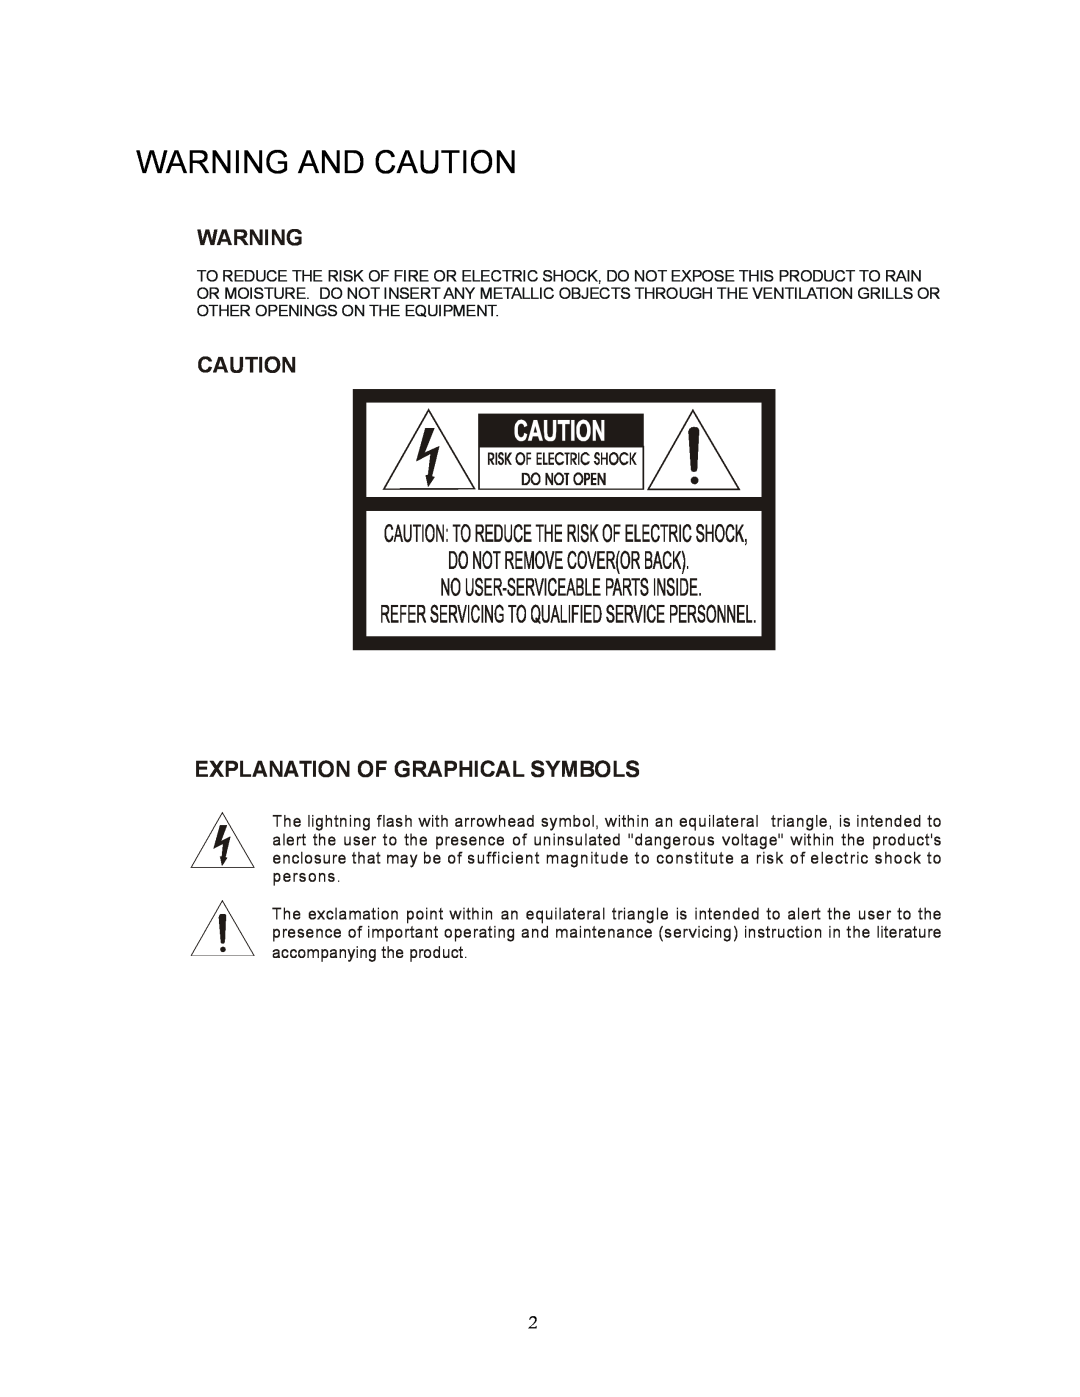 Speco Technologies KBD-927 instruction manual Warning And Caution, Explanation Of Graphical Symbols 